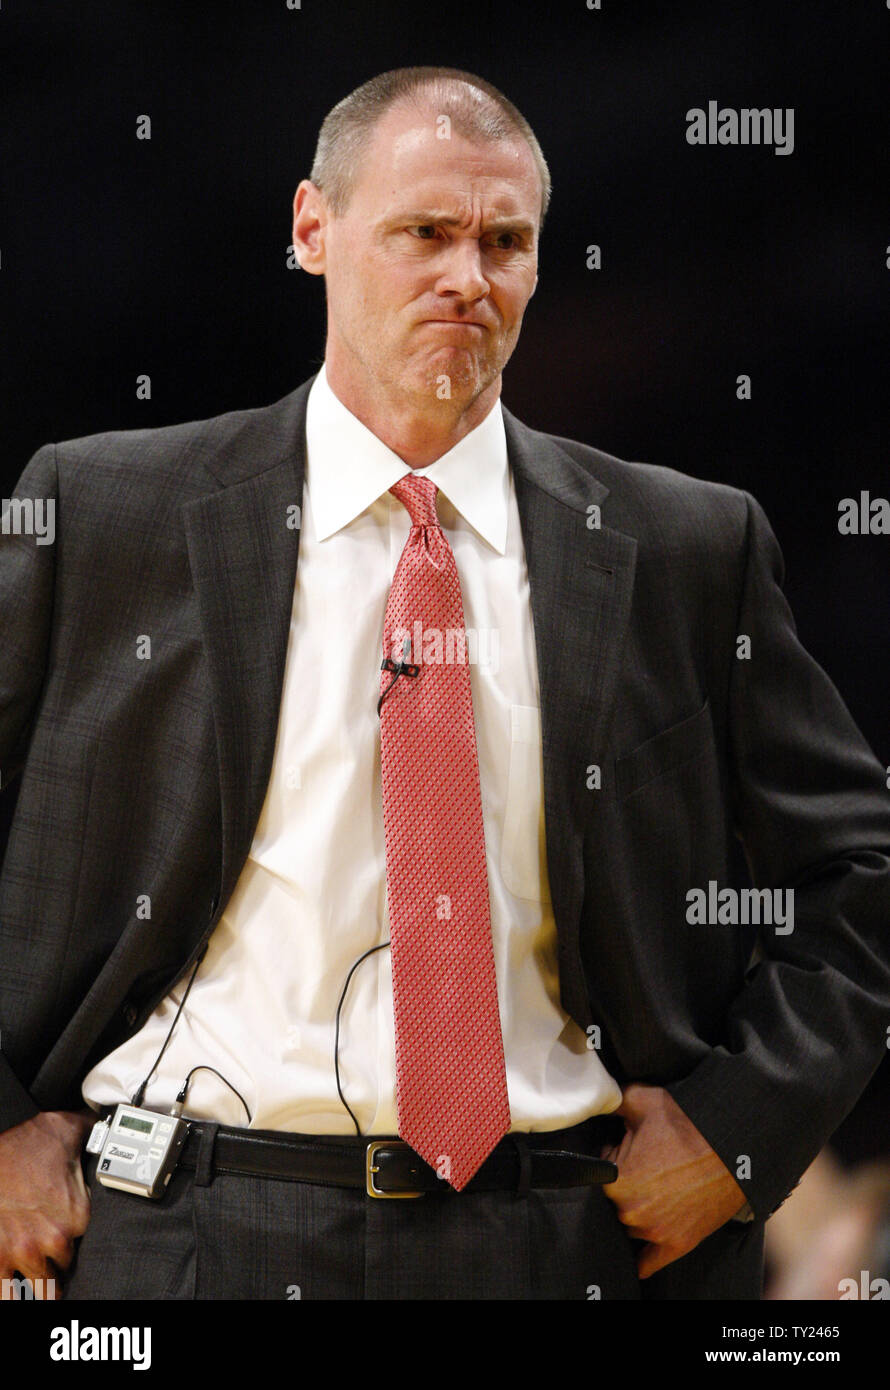 Dallas Maverick S Head Coach Rick Carlisle Isn T Happy With A Call Against His Team In Game 2 Of The Western Conference Semifinals Against The Los Angeles Lakers On May 4 11 In